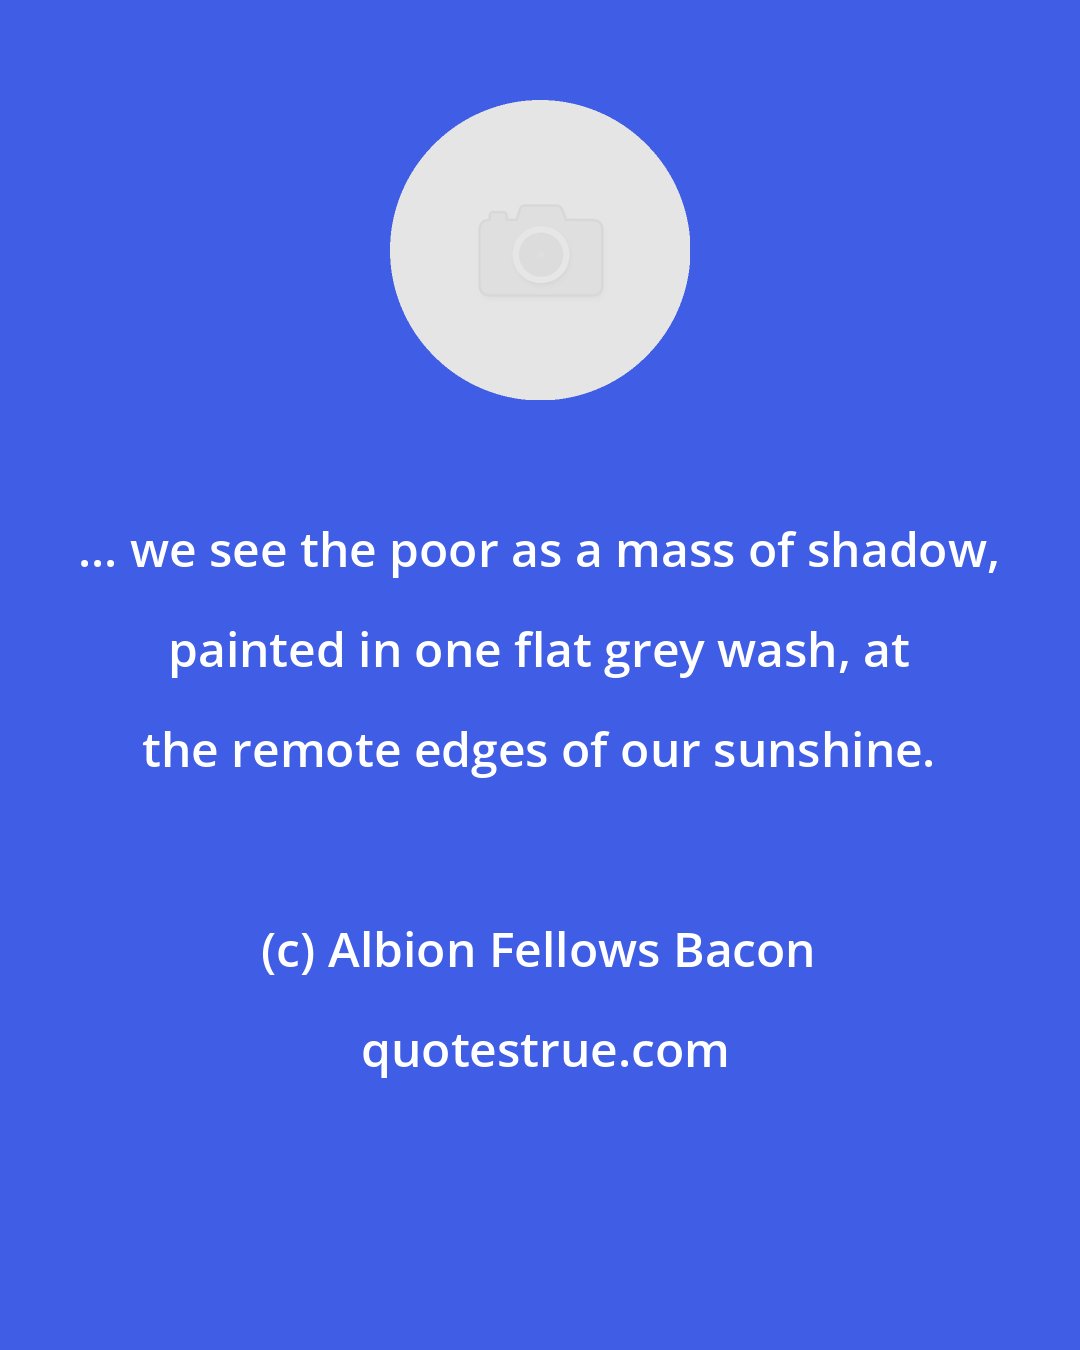 Albion Fellows Bacon: ... we see the poor as a mass of shadow, painted in one flat grey wash, at the remote edges of our sunshine.